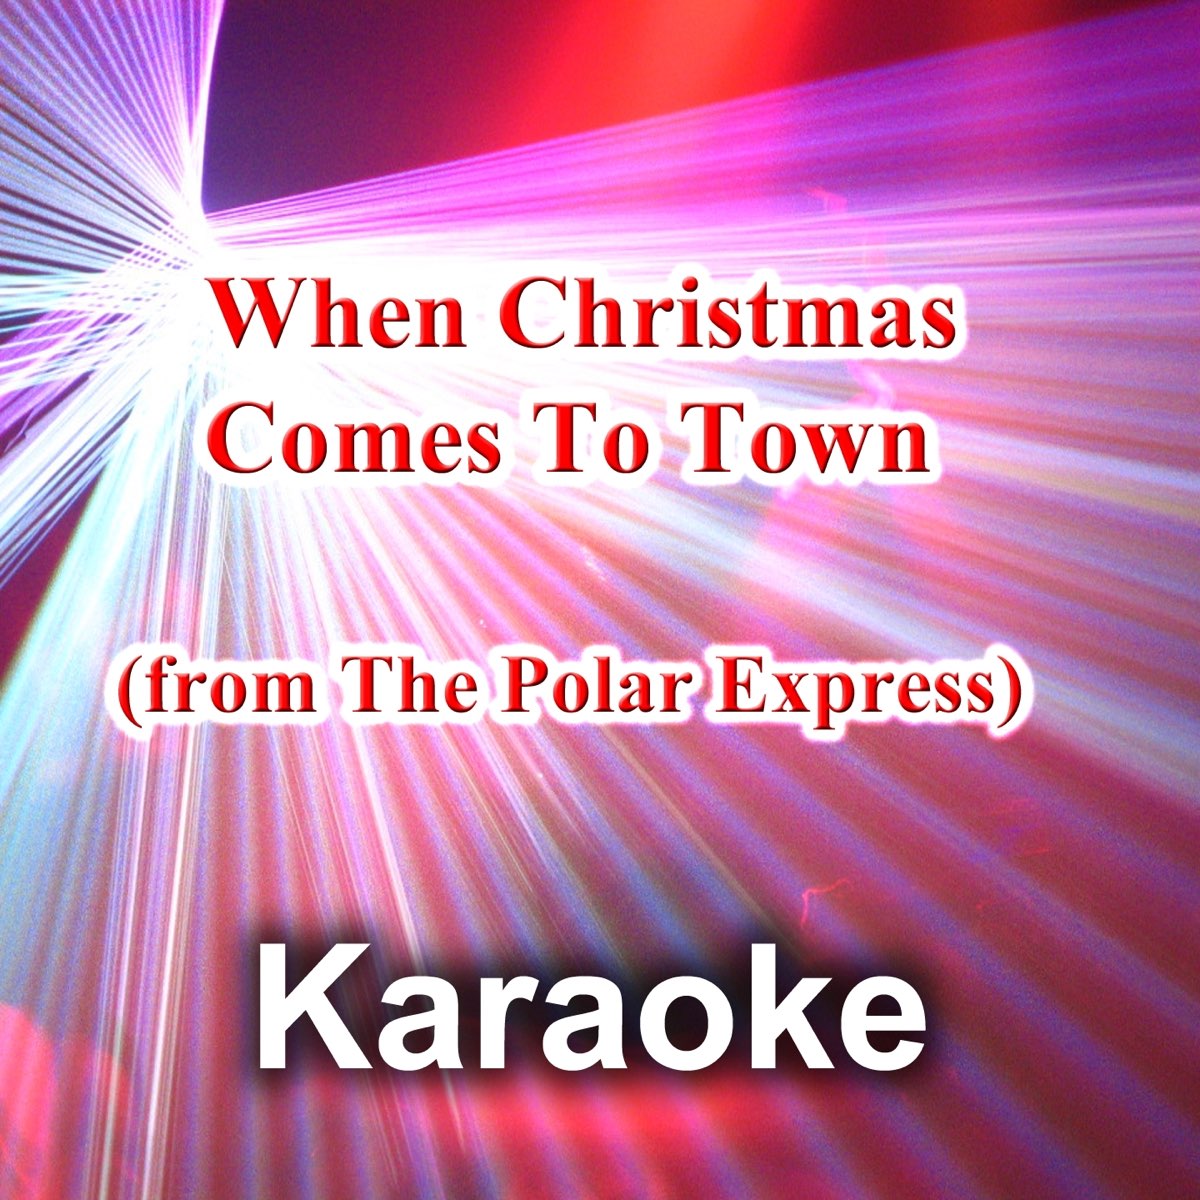 When Christmas Comes to Town (from "The Polar Express") [Karaoke Version] -  Single by Maxy K on Apple Music